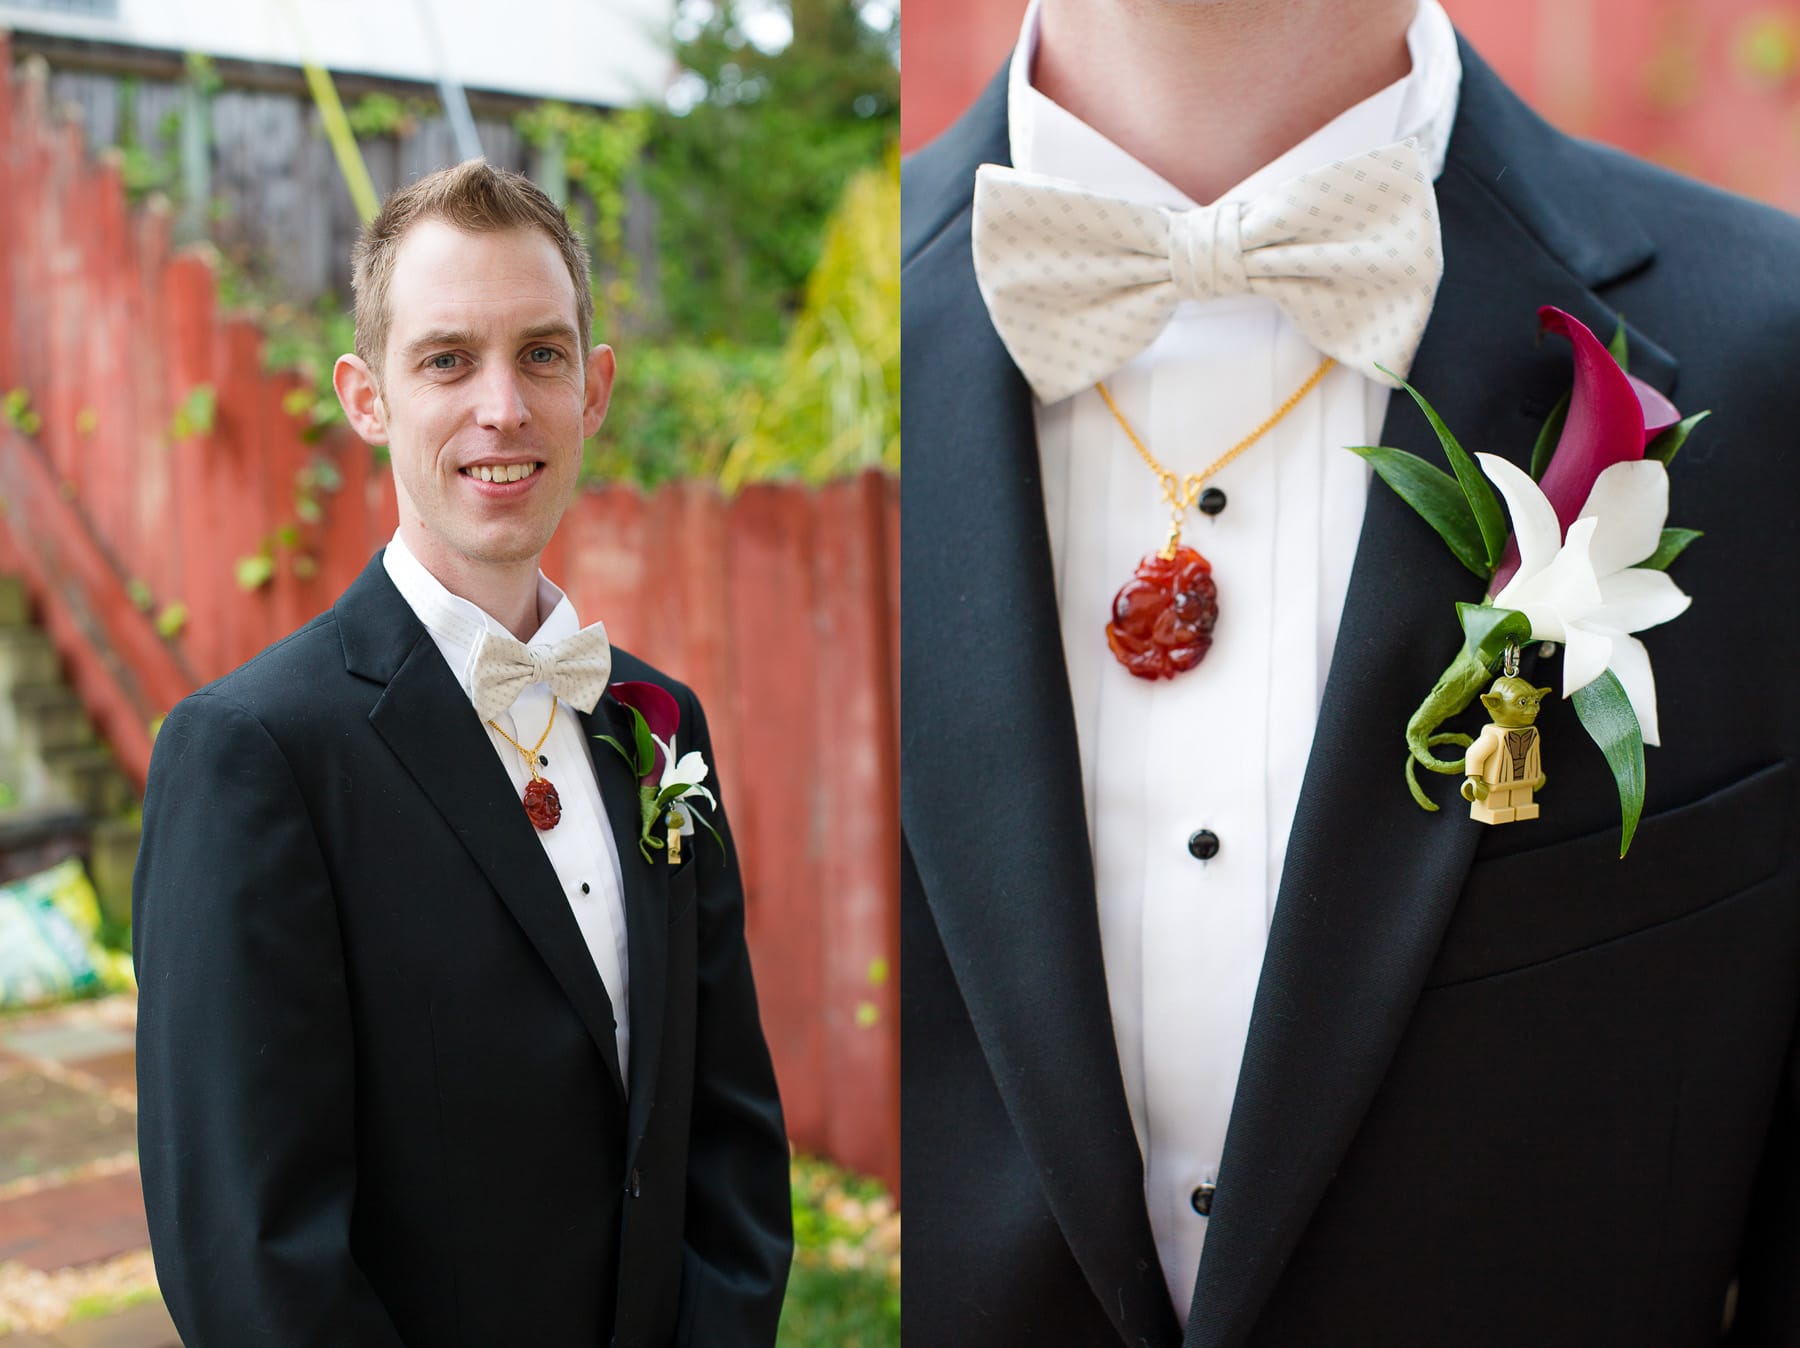 Groom in suit with white bowtie